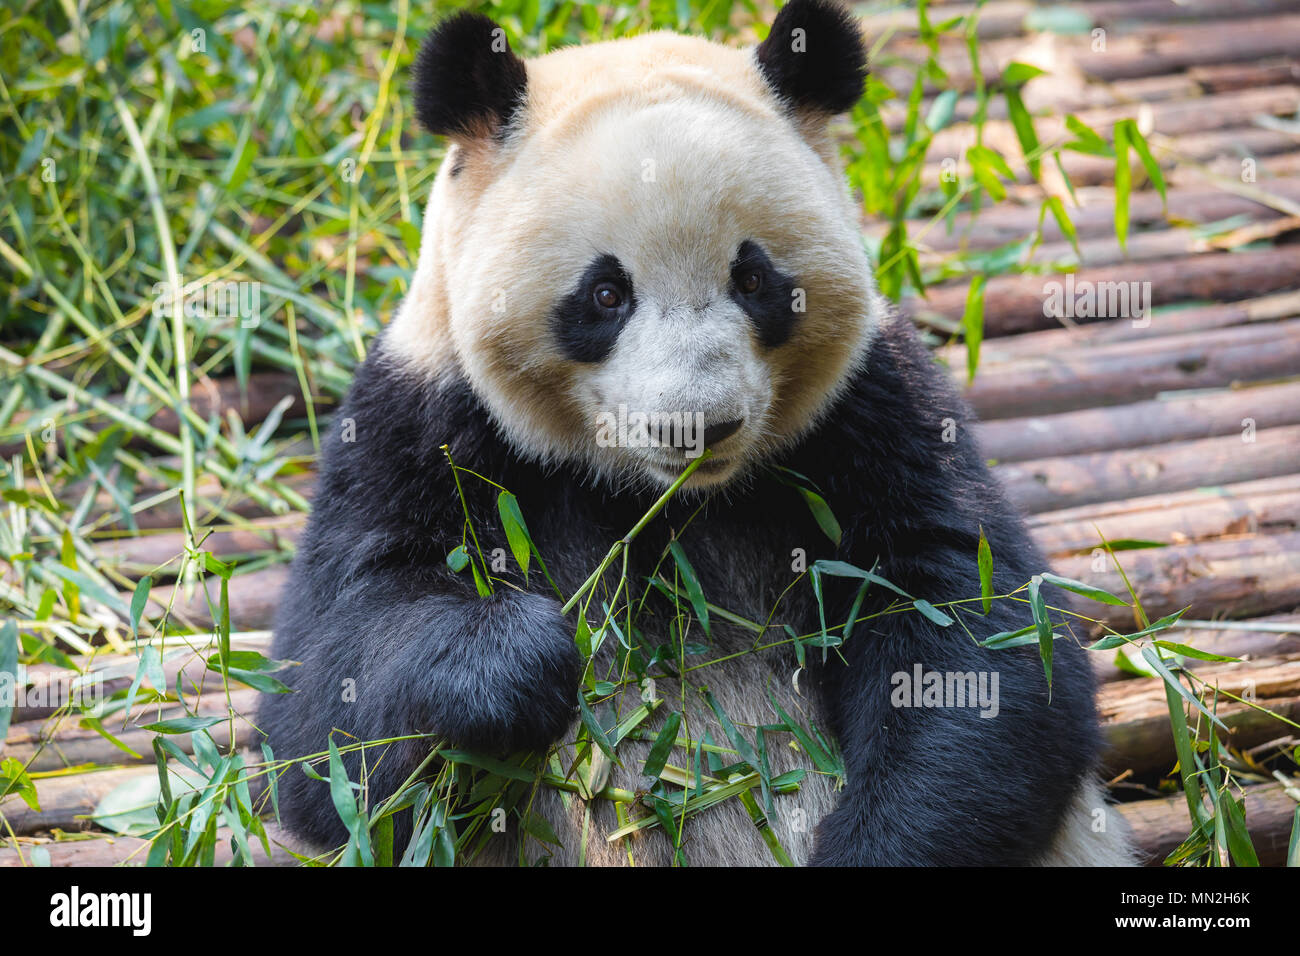 Portrait of a giant panda eating bamboo . . Stock Photo